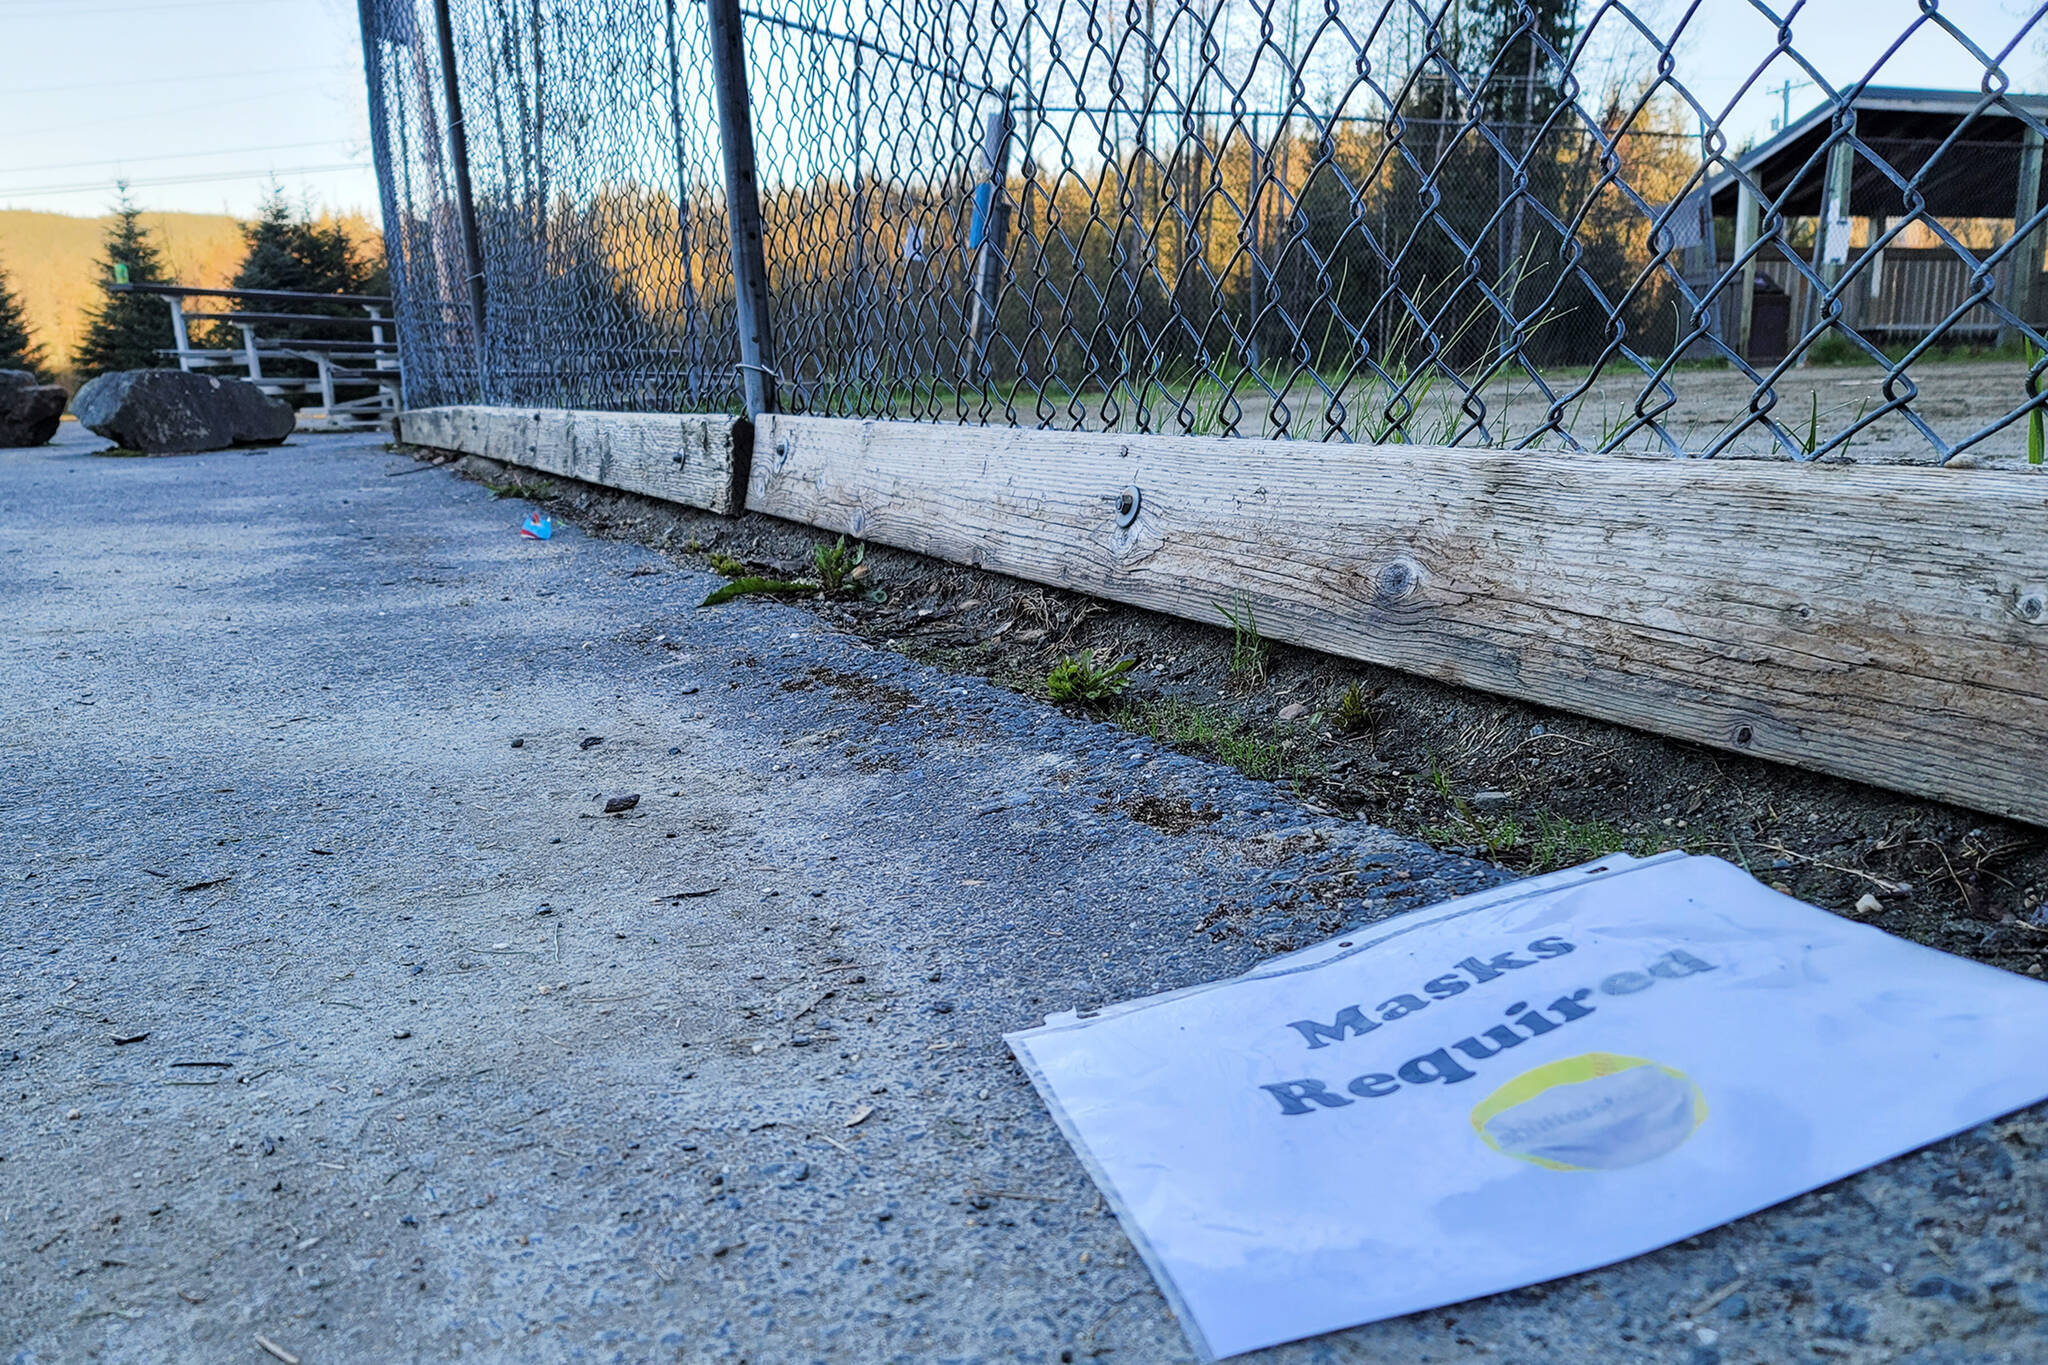 A sign reading “Masks Required” lies on the ground near a softball field at Melvin Park in this May photo. The City and Borough of Juneau is lowering the community risk level for COVID-19, but masks remain required inside public spaces. (Ben Hohenstatt / Juneau Empire)